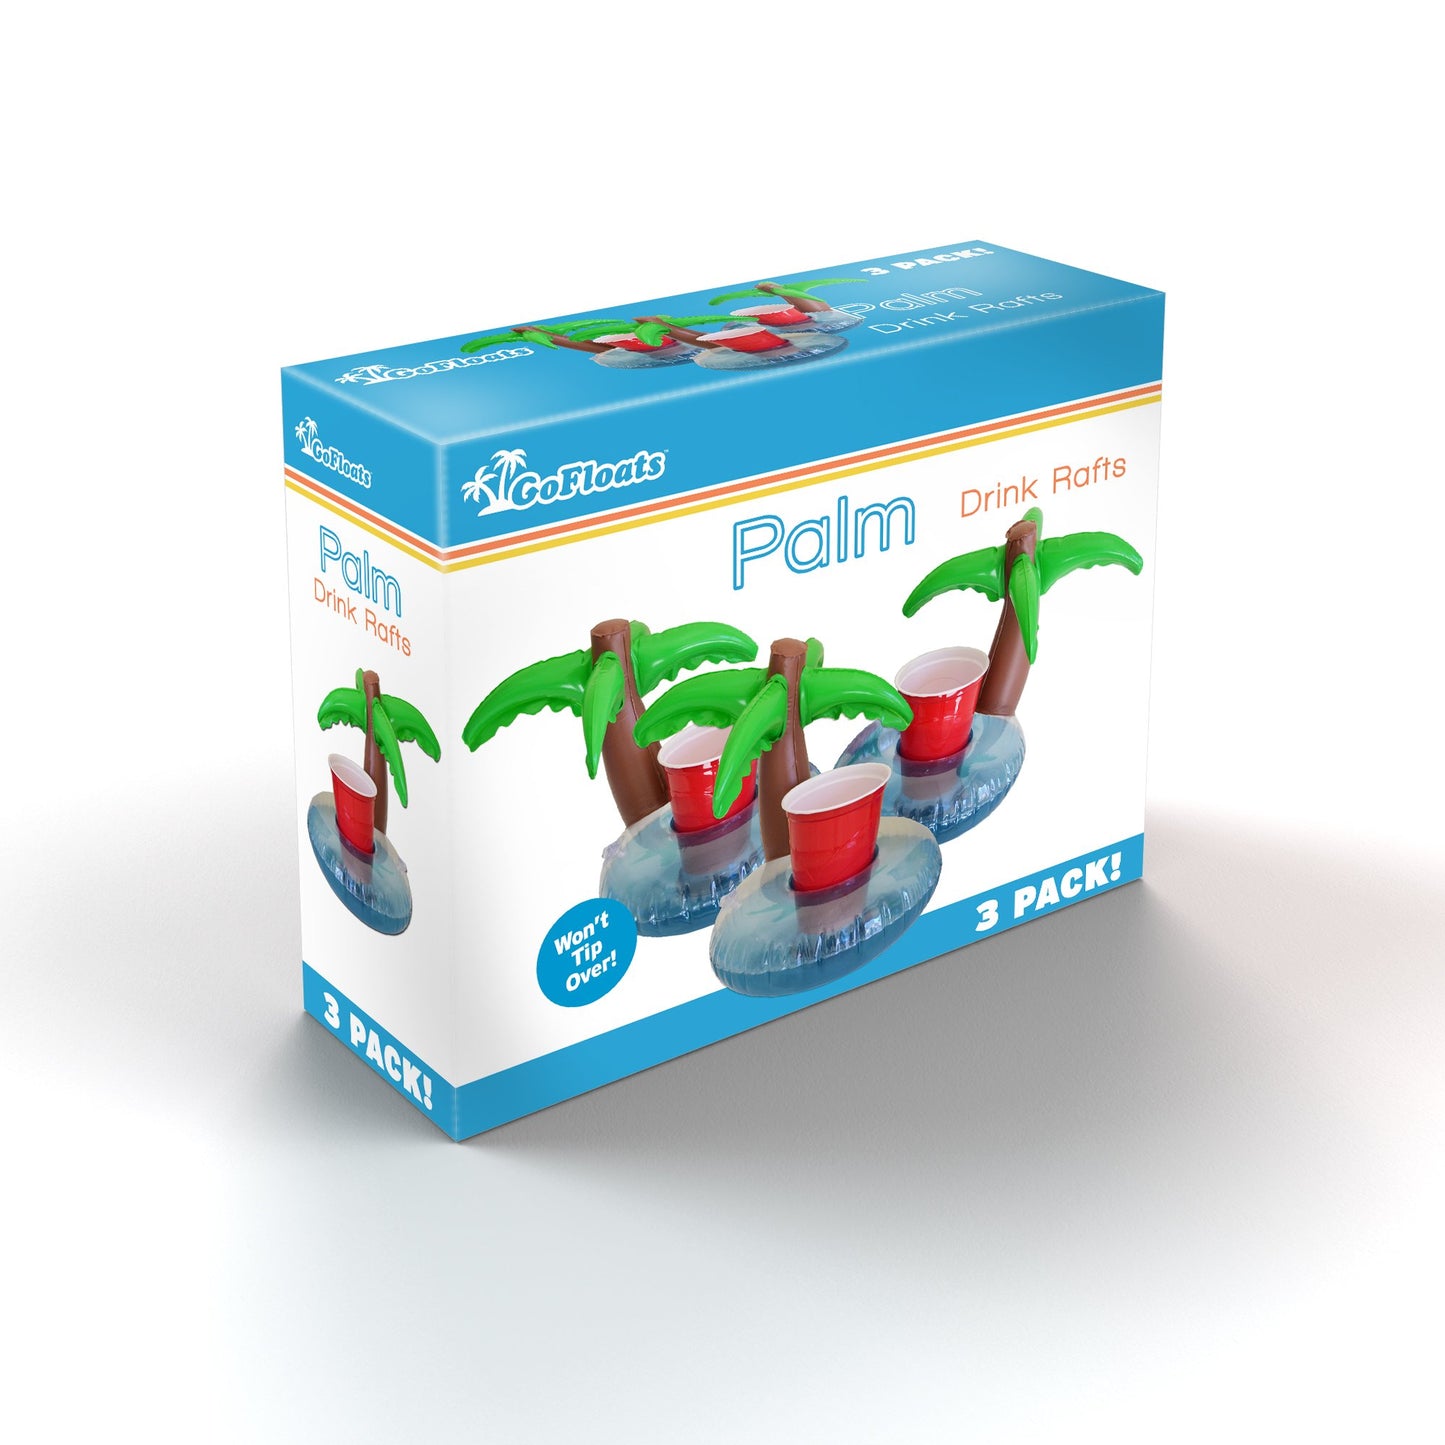 GoFloats Drink Float 3 Pack Palm